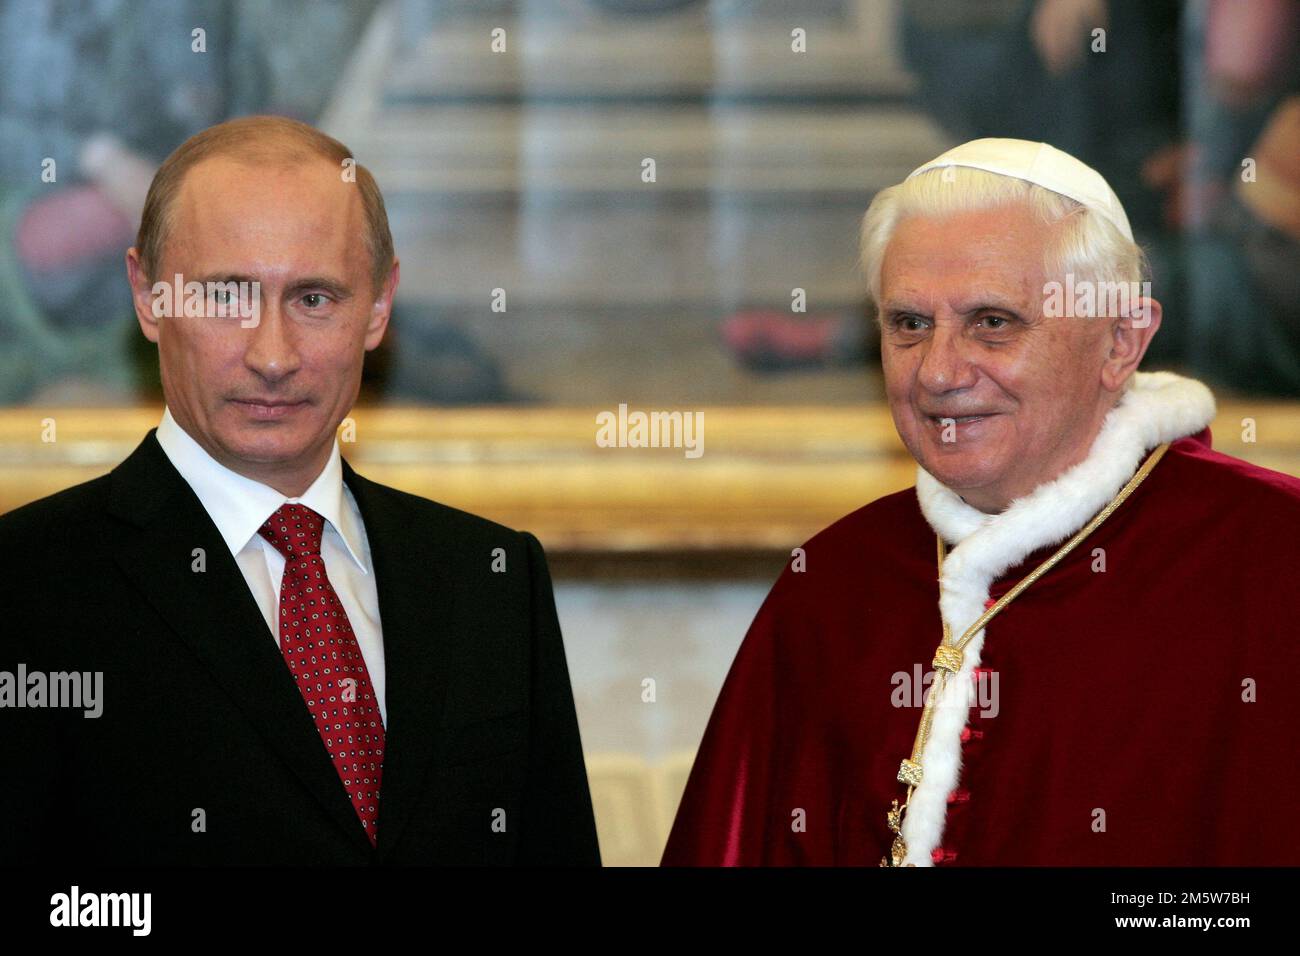 File photo - Pope Benedict XVI met with Russia's President Vladimir Putin, at the Vatican on March 13, 2007. - Former Pope Benedict XVI has died at his Vatican residence, aged 95, almost a decade after he stood down because of ailing health. He led the Catholic Church for less than eight years until, in 2013, he became the first Pope to resign since Gregory XII in 1415. Photo by Eric Vandeville/ABACAPRESS.COM Stock Photo